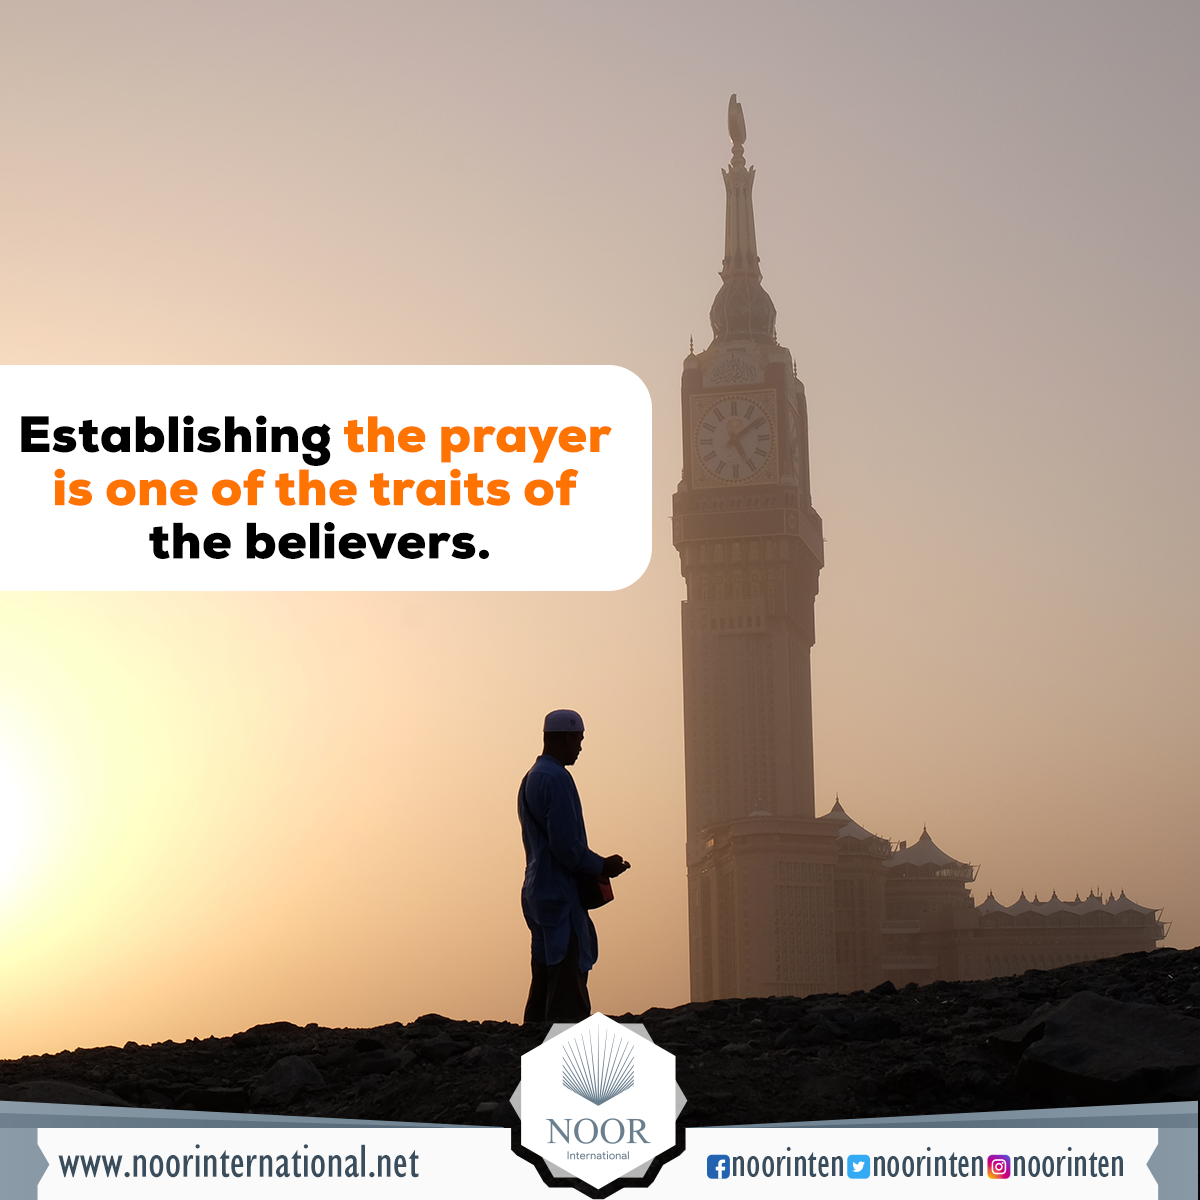 Establishing the prayer is one of the traits of the believers.